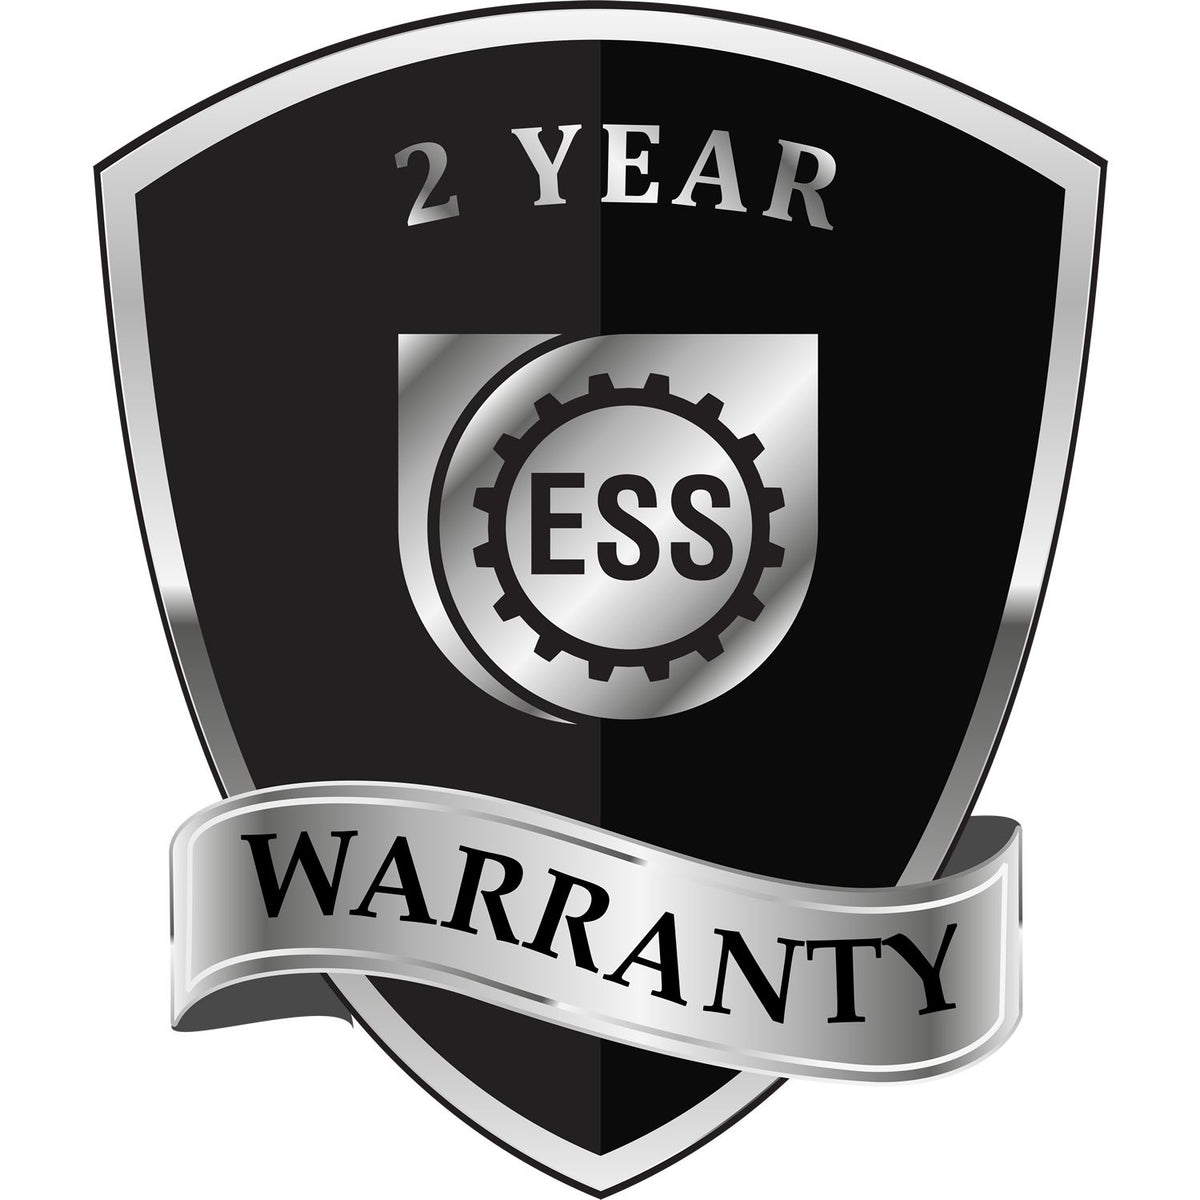 A black and silver badge or emblem showing warranty information for the Long Reach Michigan Geology Seal